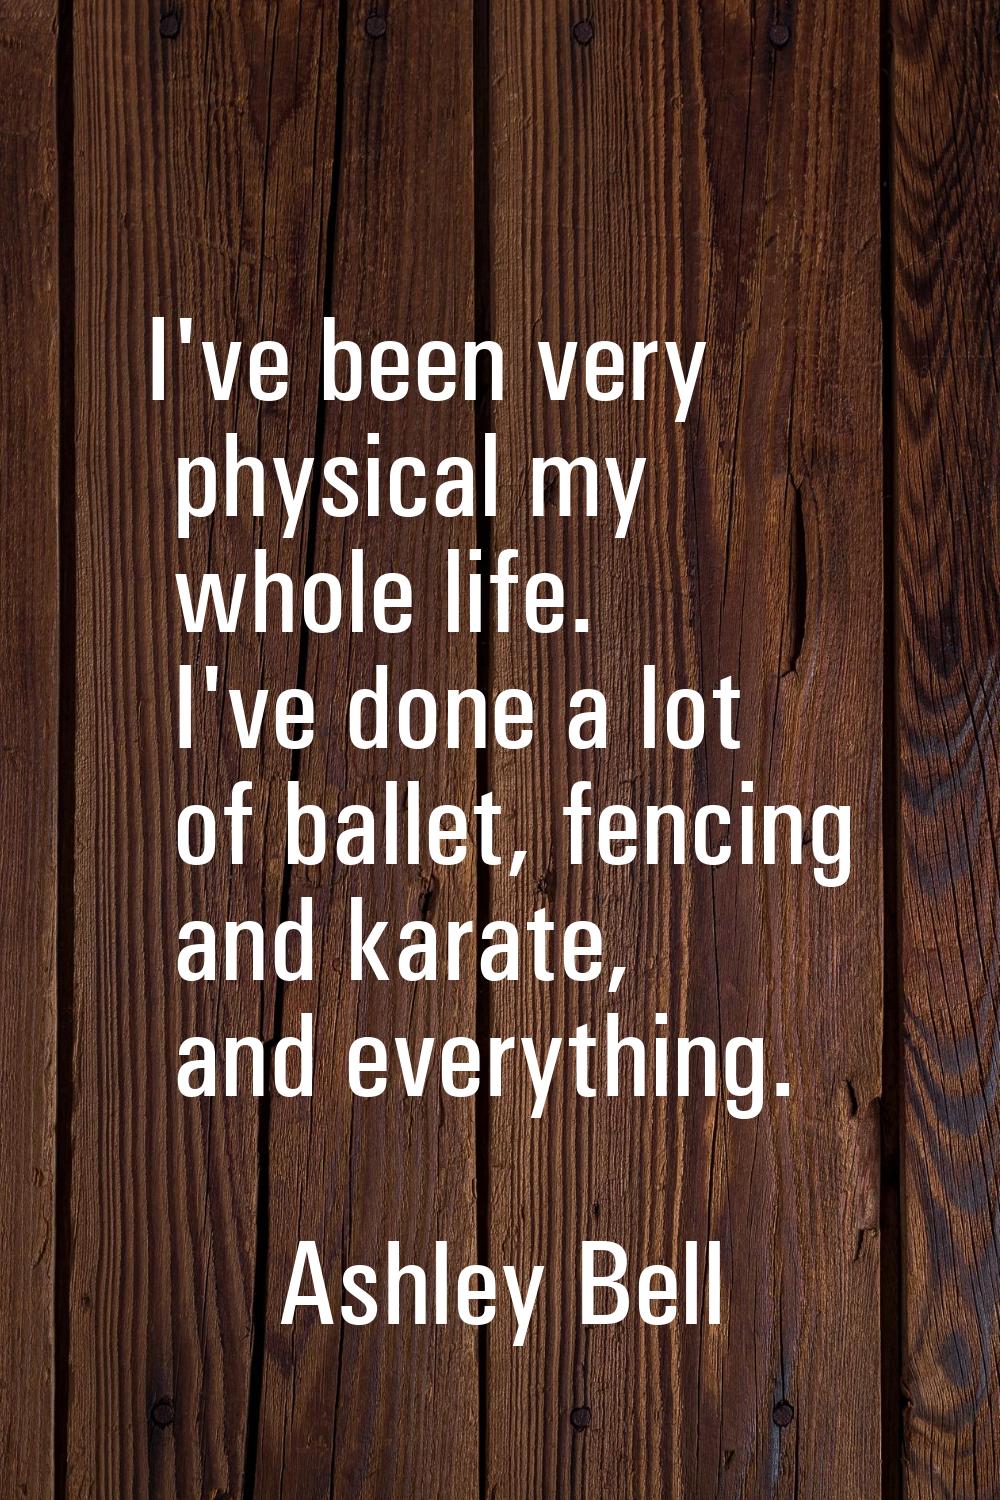 I've been very physical my whole life. I've done a lot of ballet, fencing and karate, and everythin